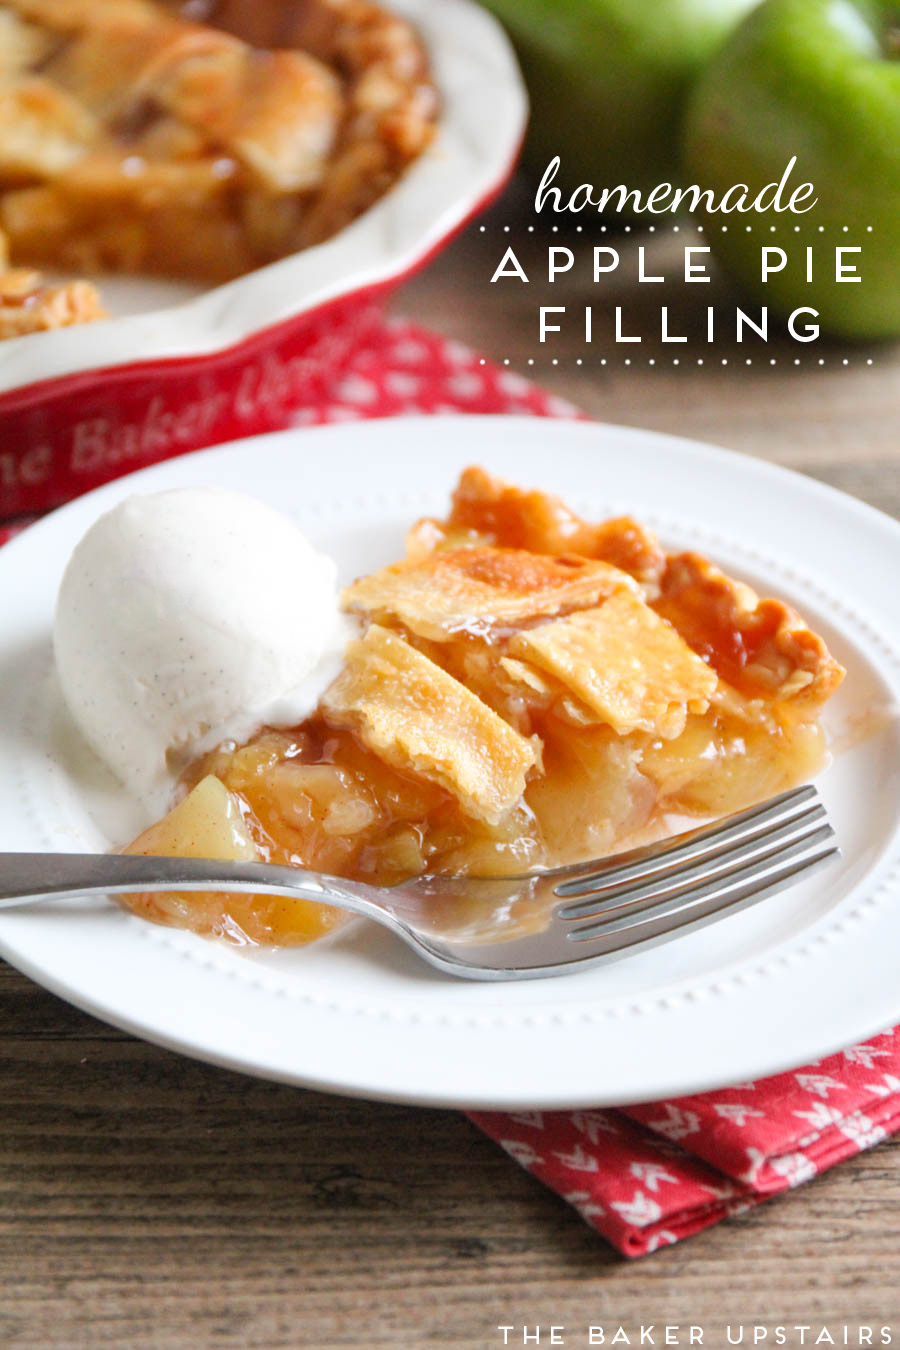 The Baker Upstairs: Homemade Apple Pie Filling